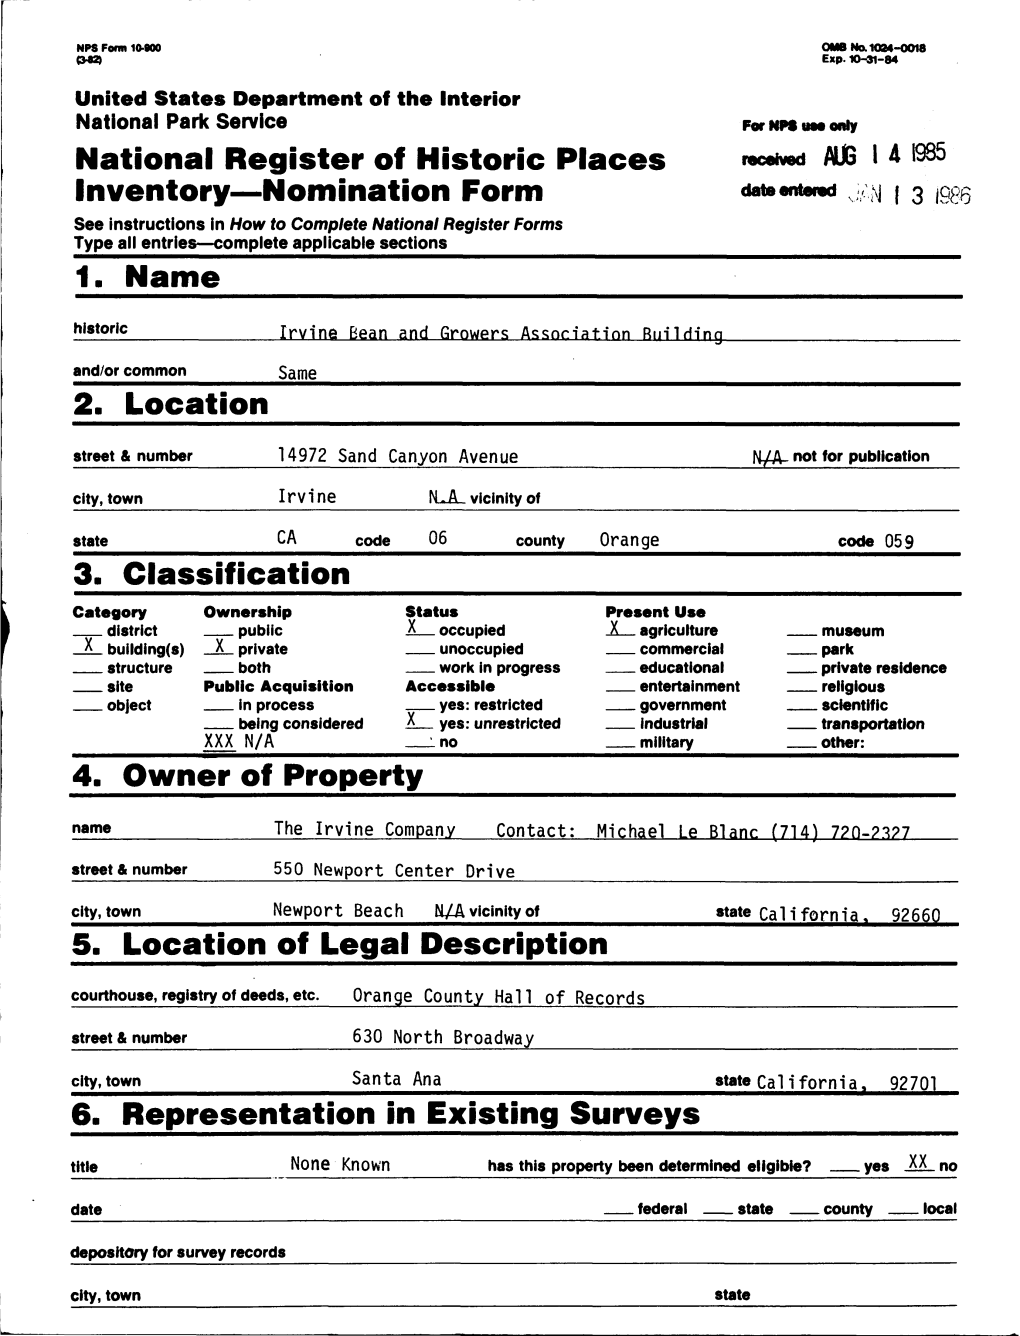 3. Classification 4. Owner Off Property